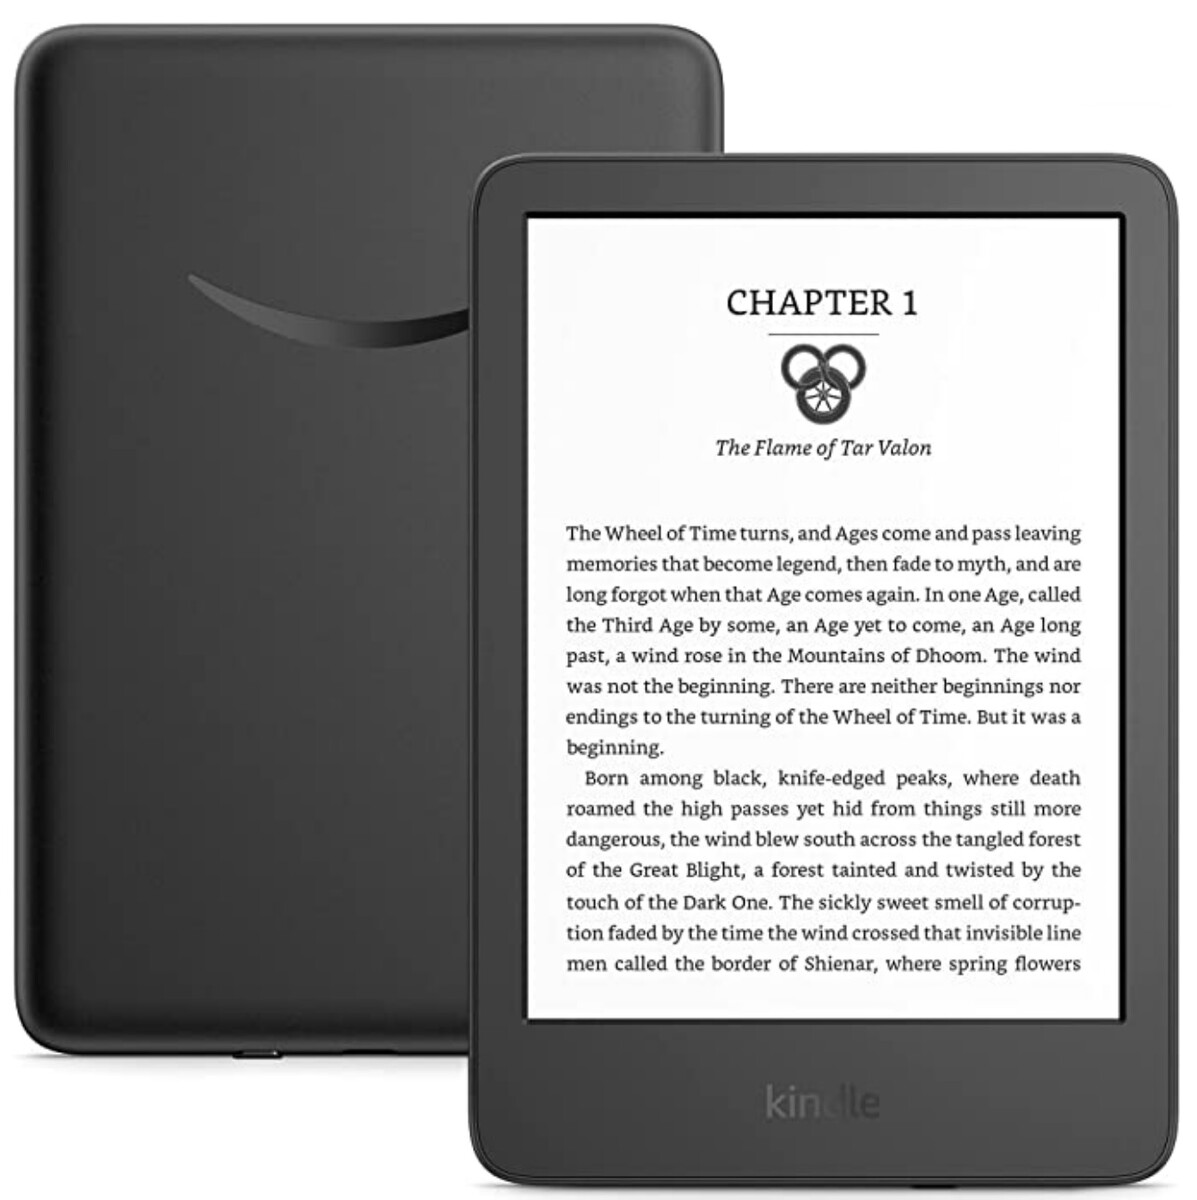 Amazon Kindle Paperwhite 5 gets handy upgrade as the new Kindle 2022 grabs all fanfare - NotebookCheck.net News